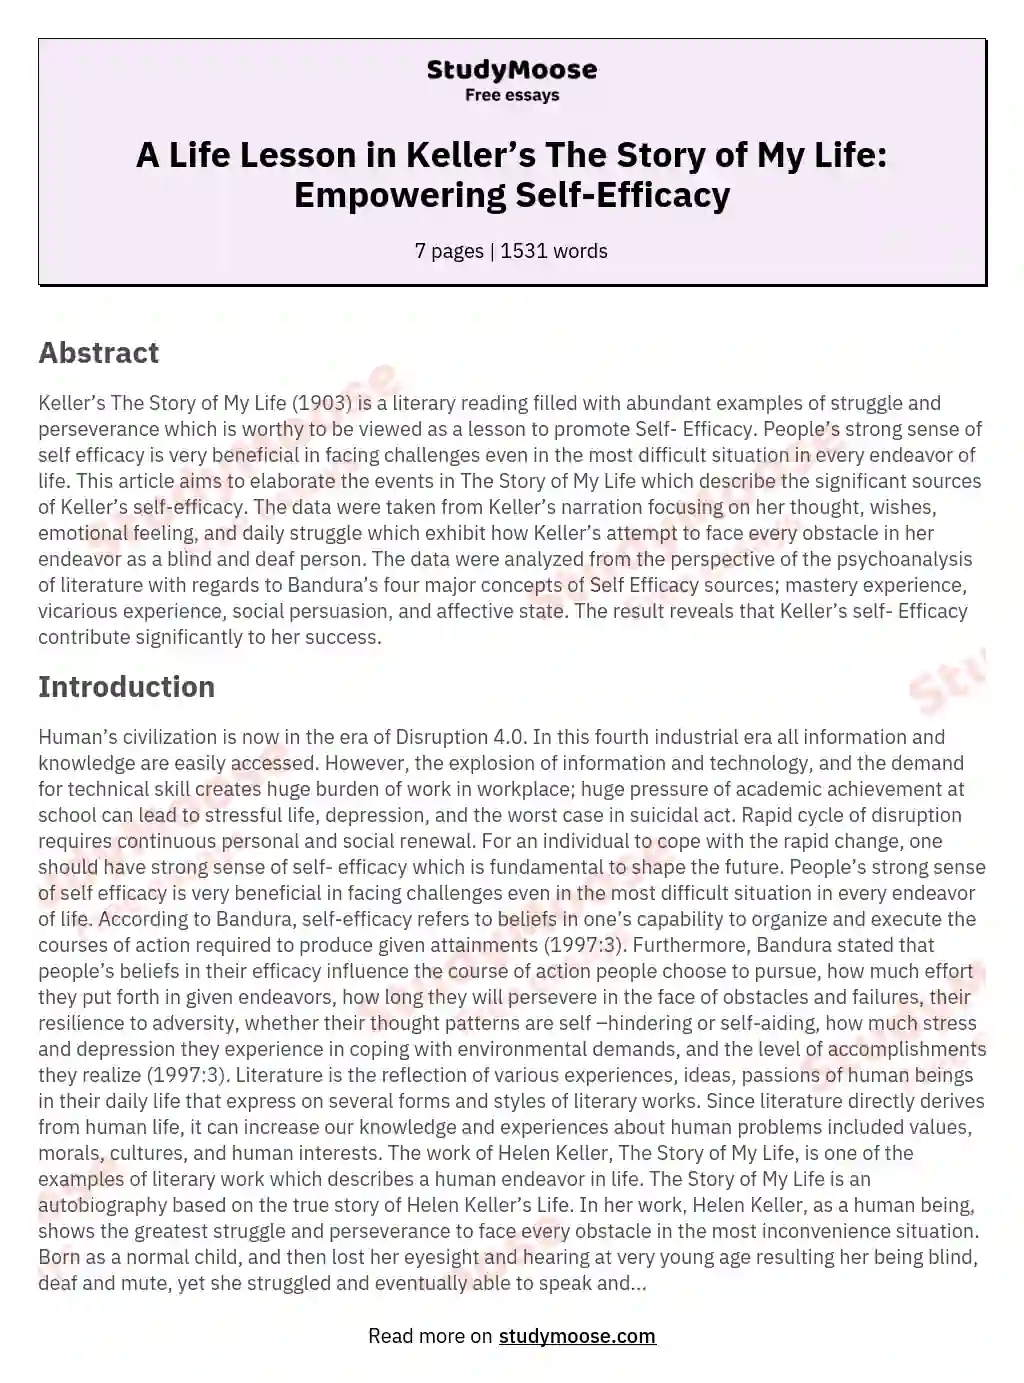 A Life Lesson in Keller’s The Story of My Life: Empowering Self-Efficacy